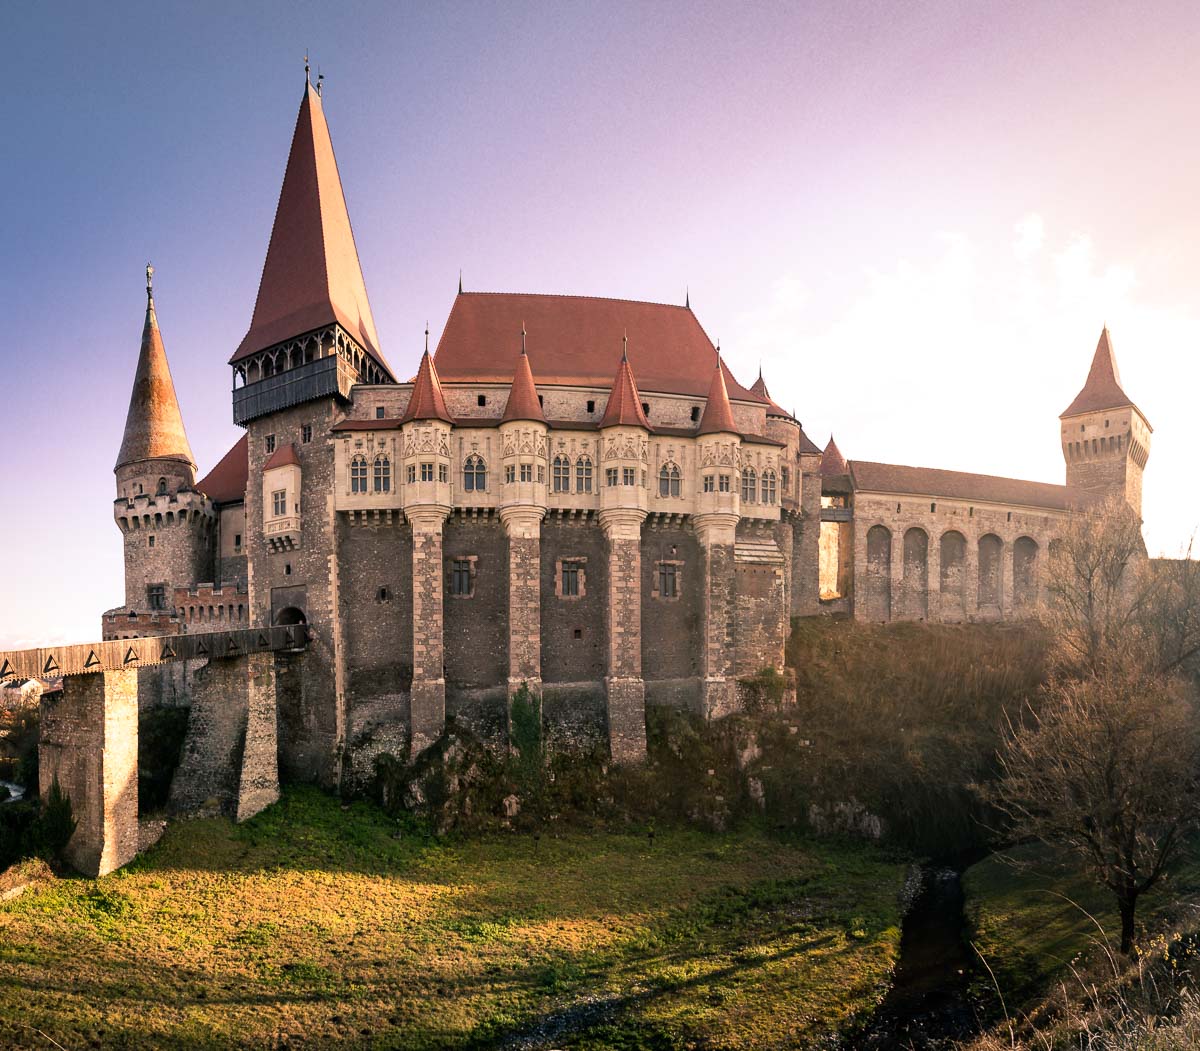 The Corvin Castle at sunset.